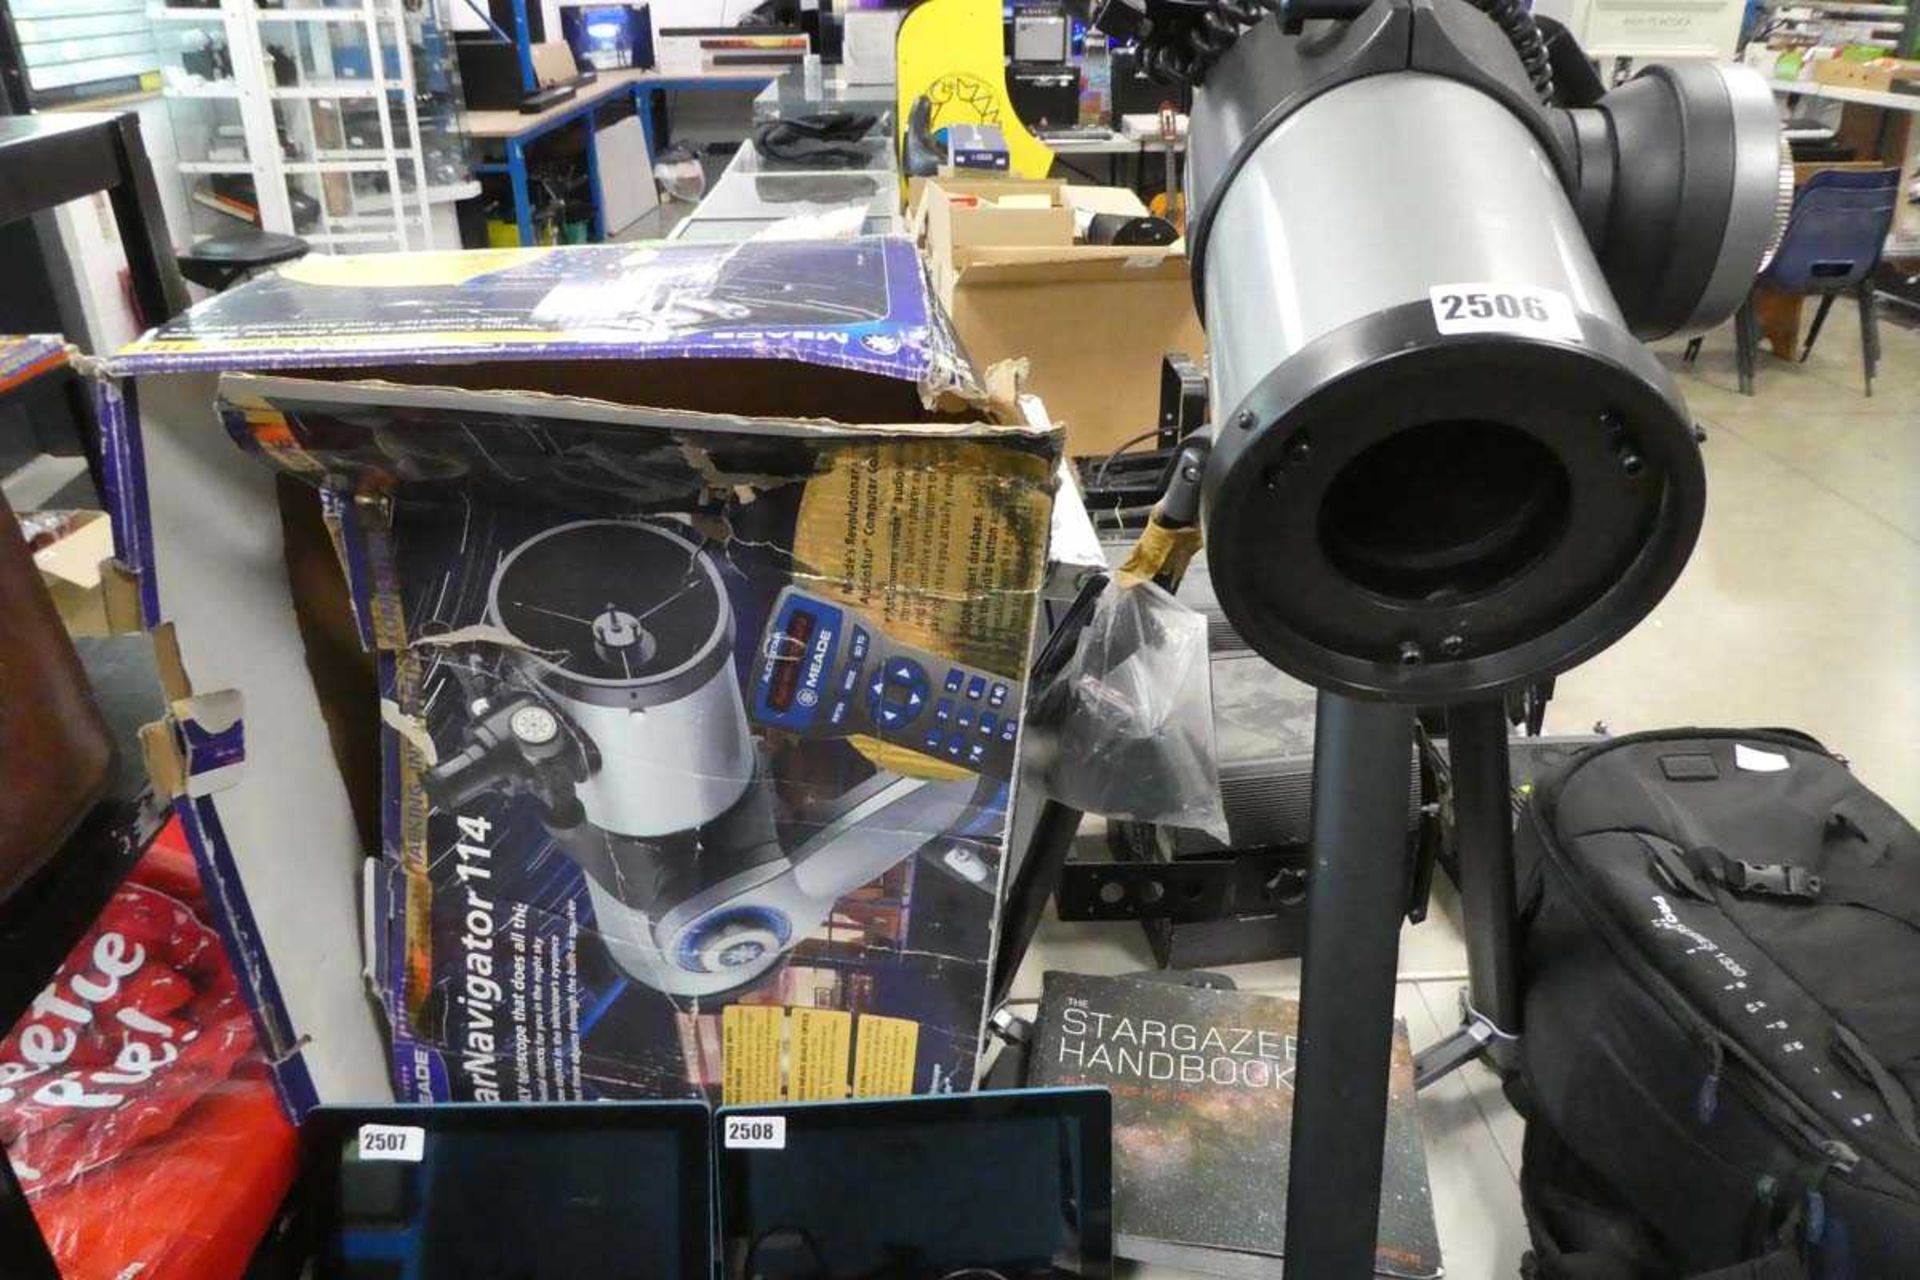 Meade refractor telescope with audio star directional controller with part box